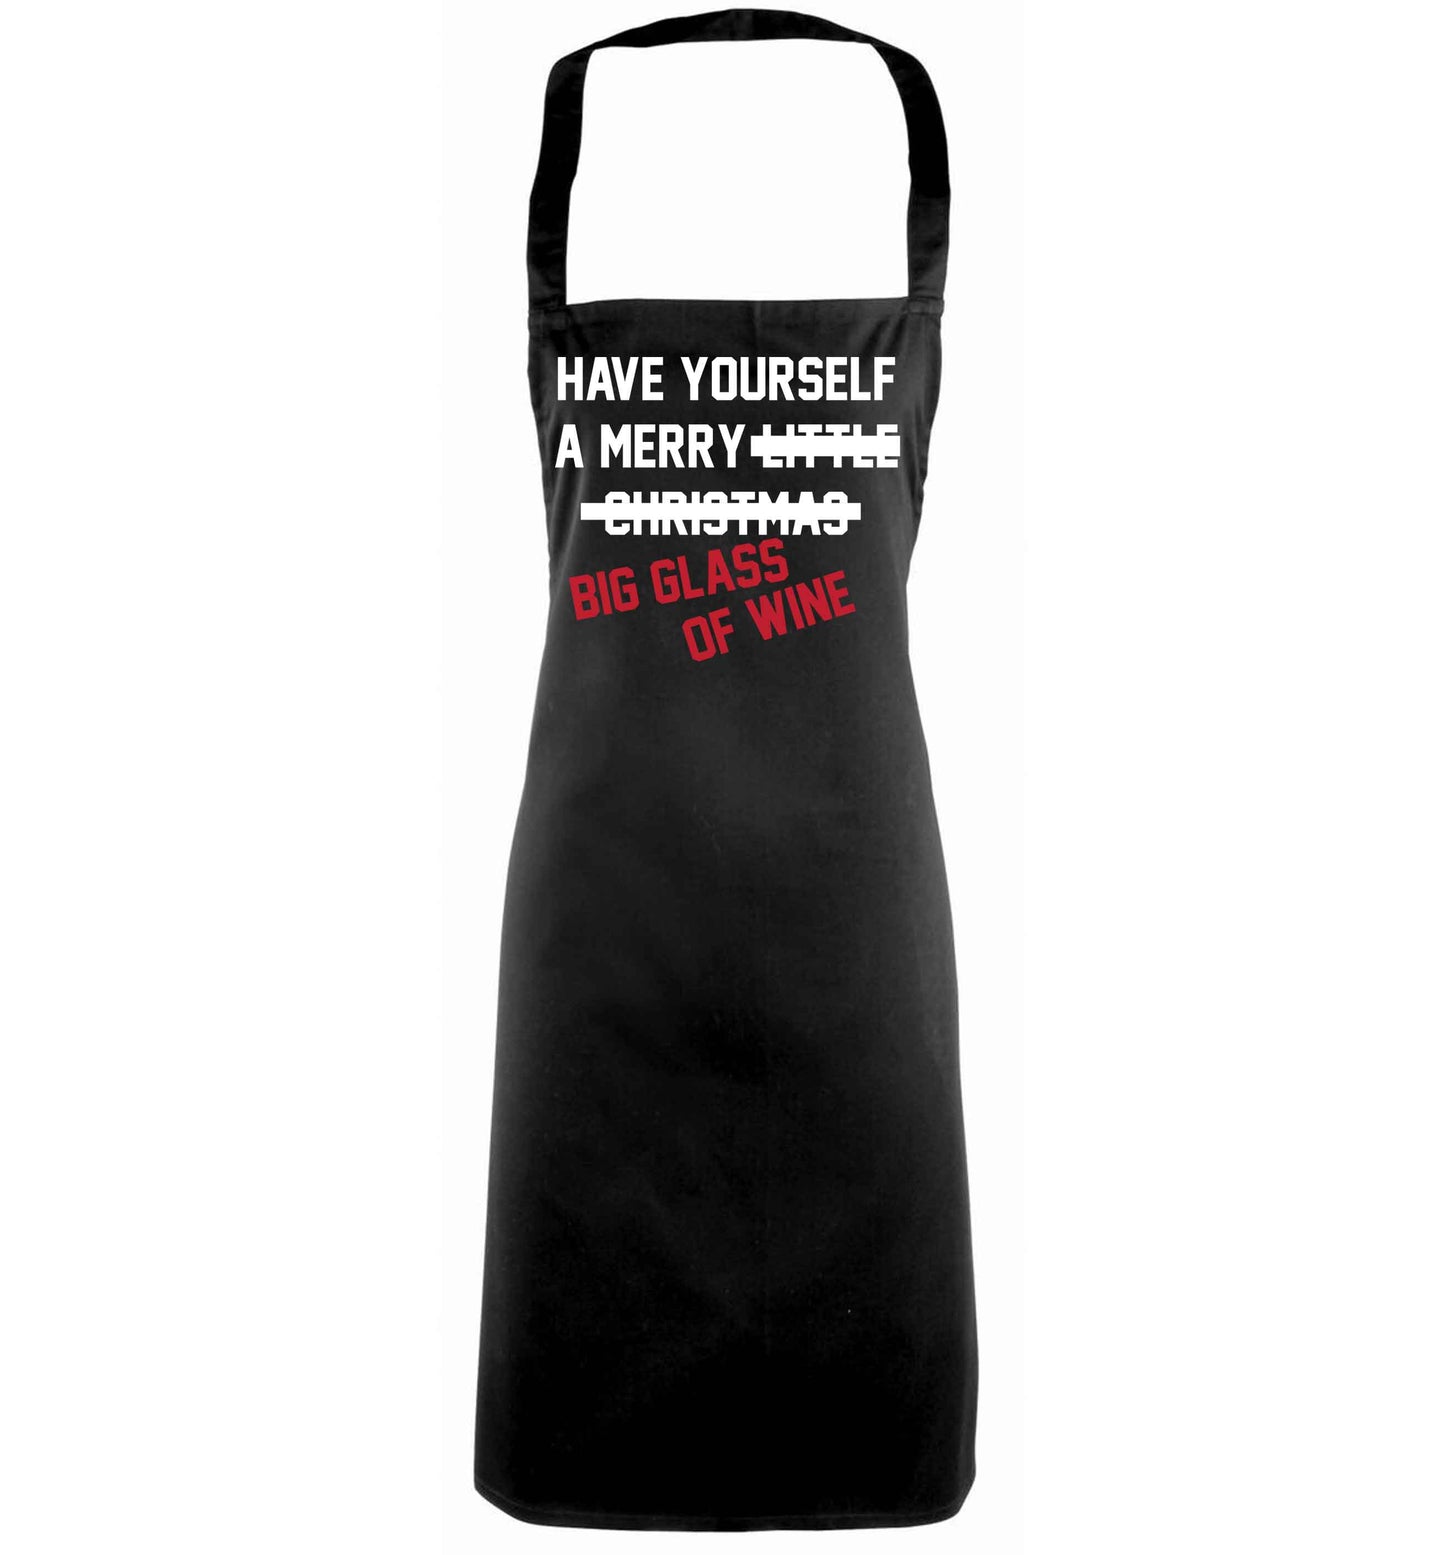 Have yourself a merry big glass of wine black apron